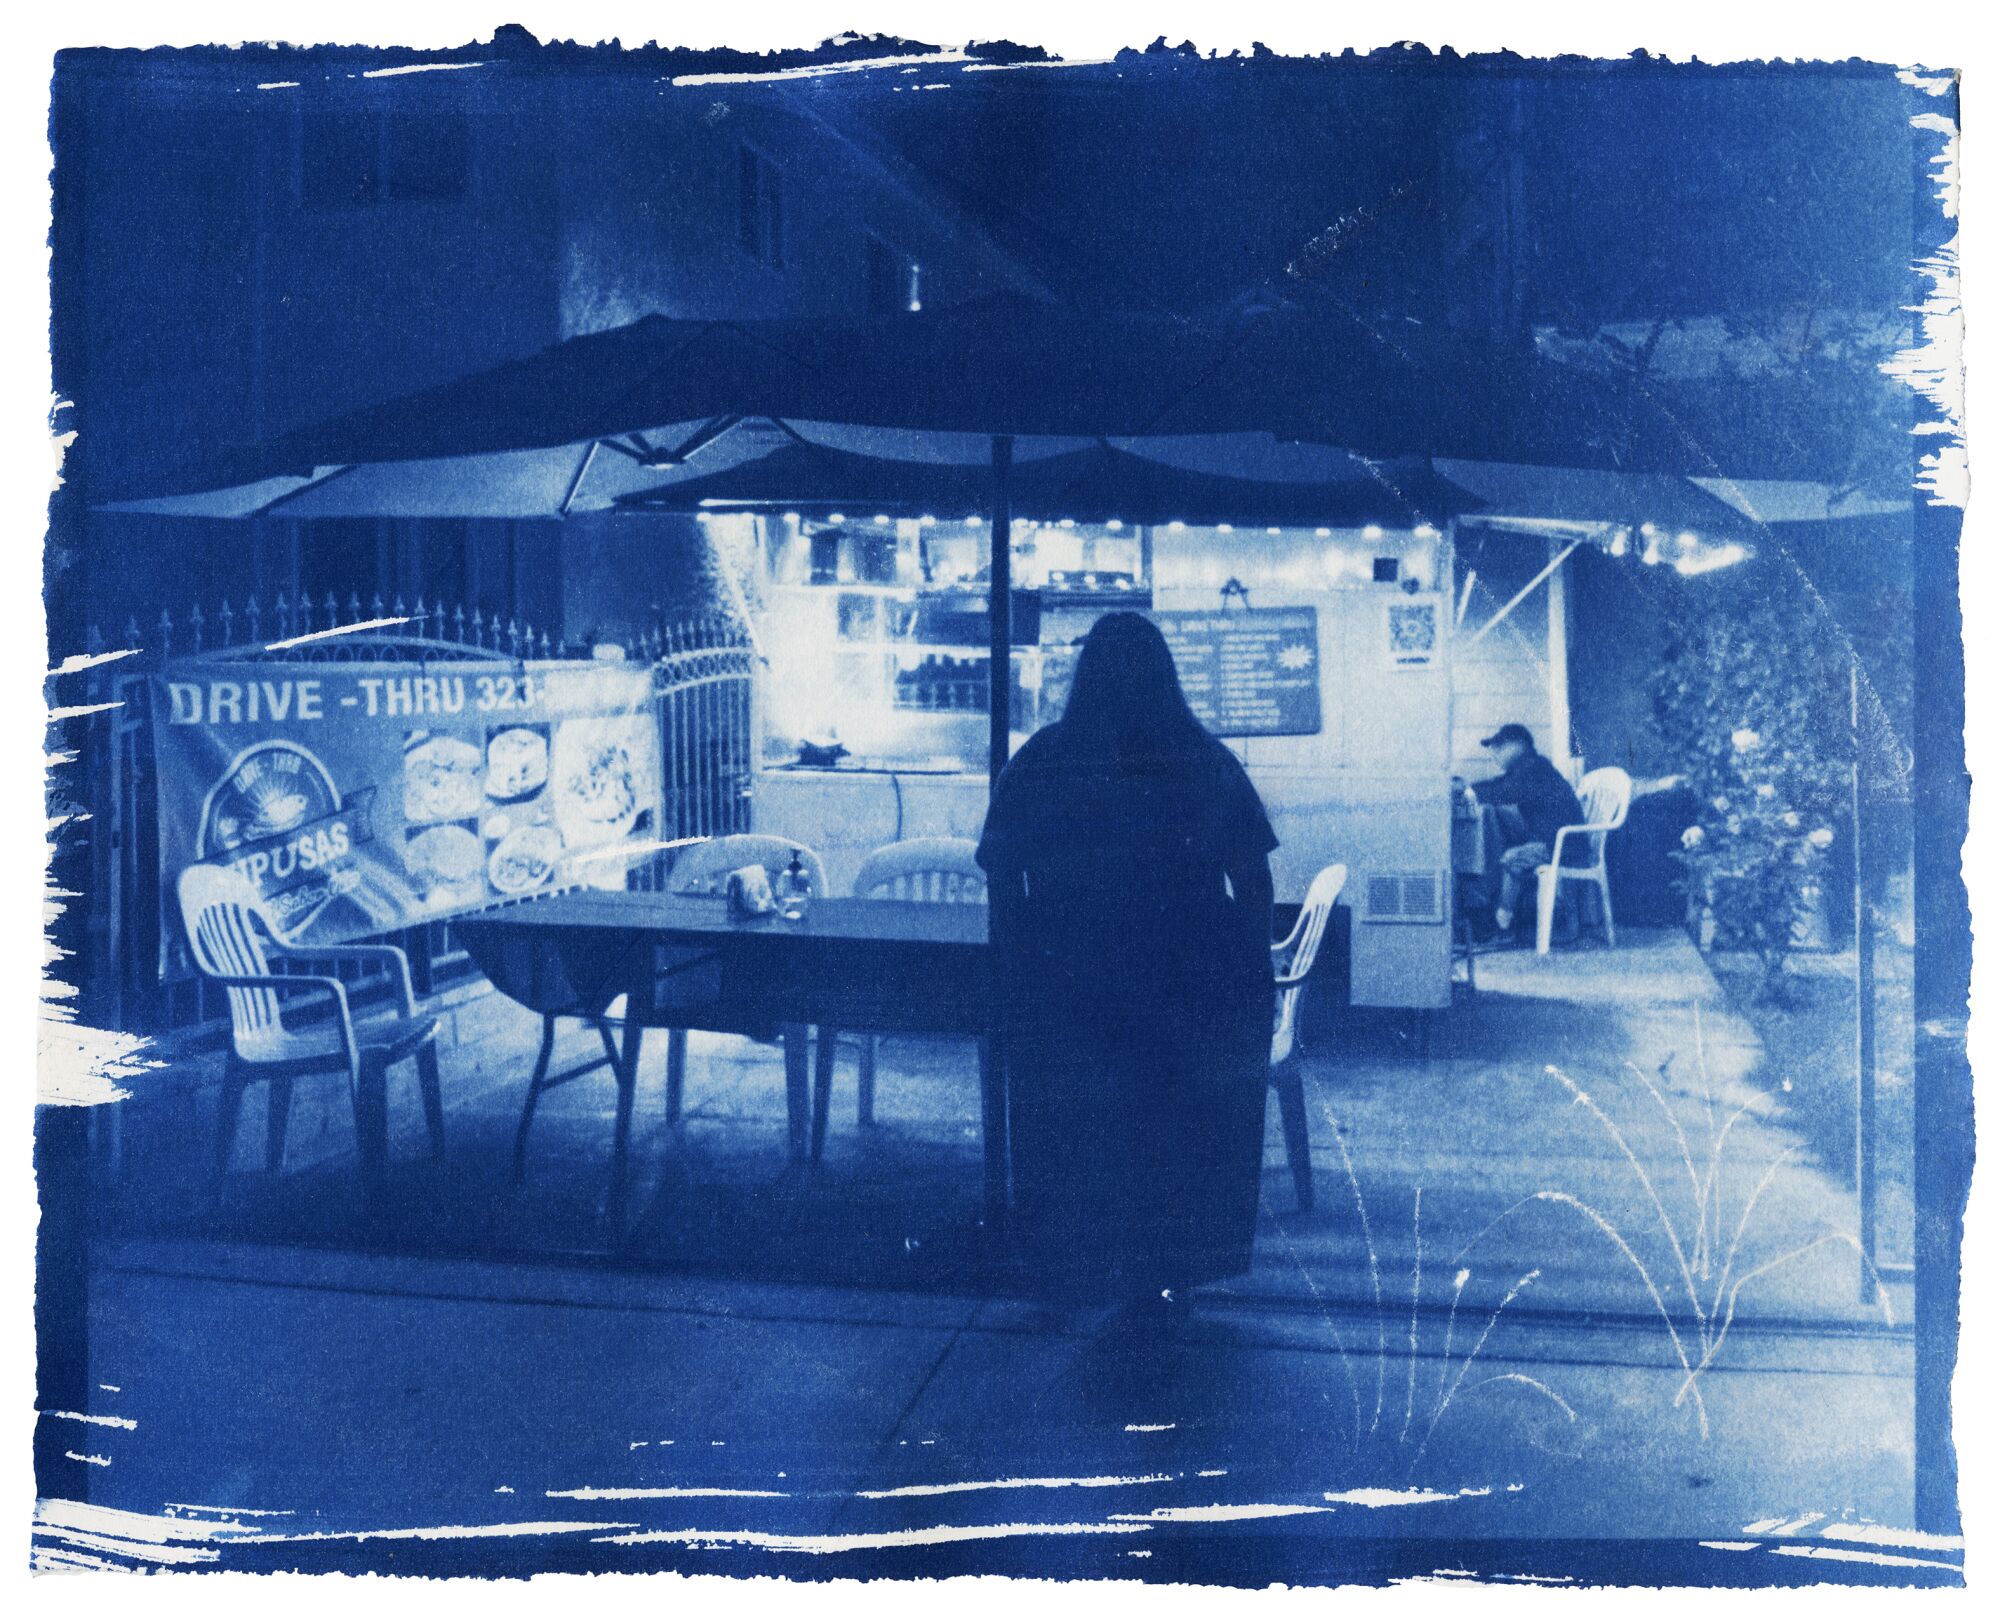 A cyanotype print of waiting pupusas scrambled on a Los Angeles road